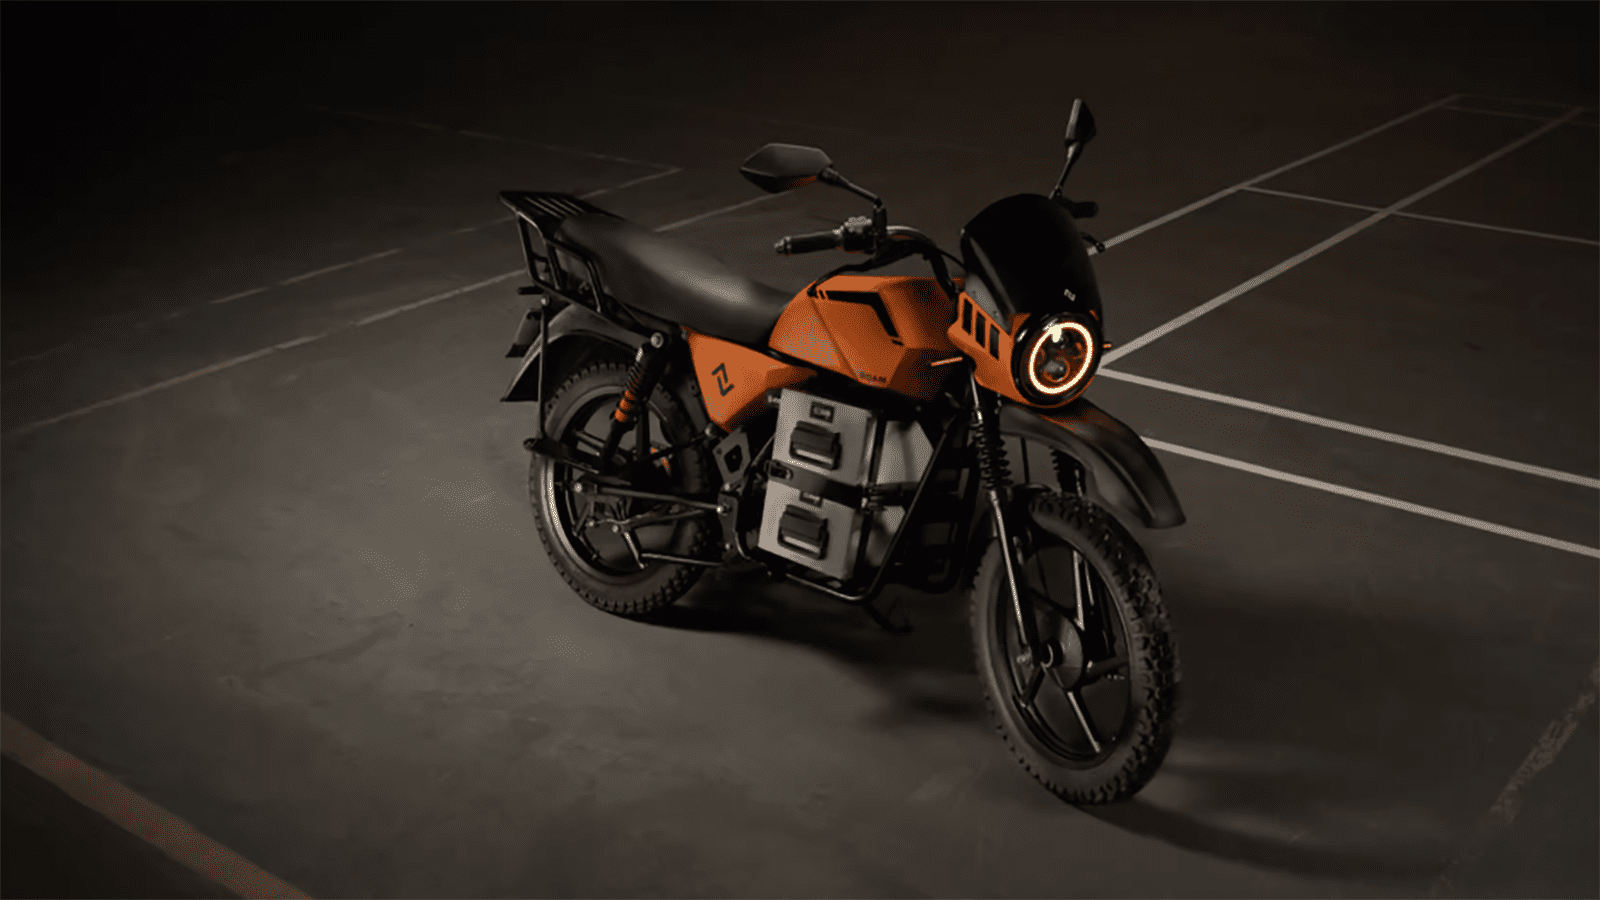 Africa gets its own electric motorcycle, the $1,500 Roam Air